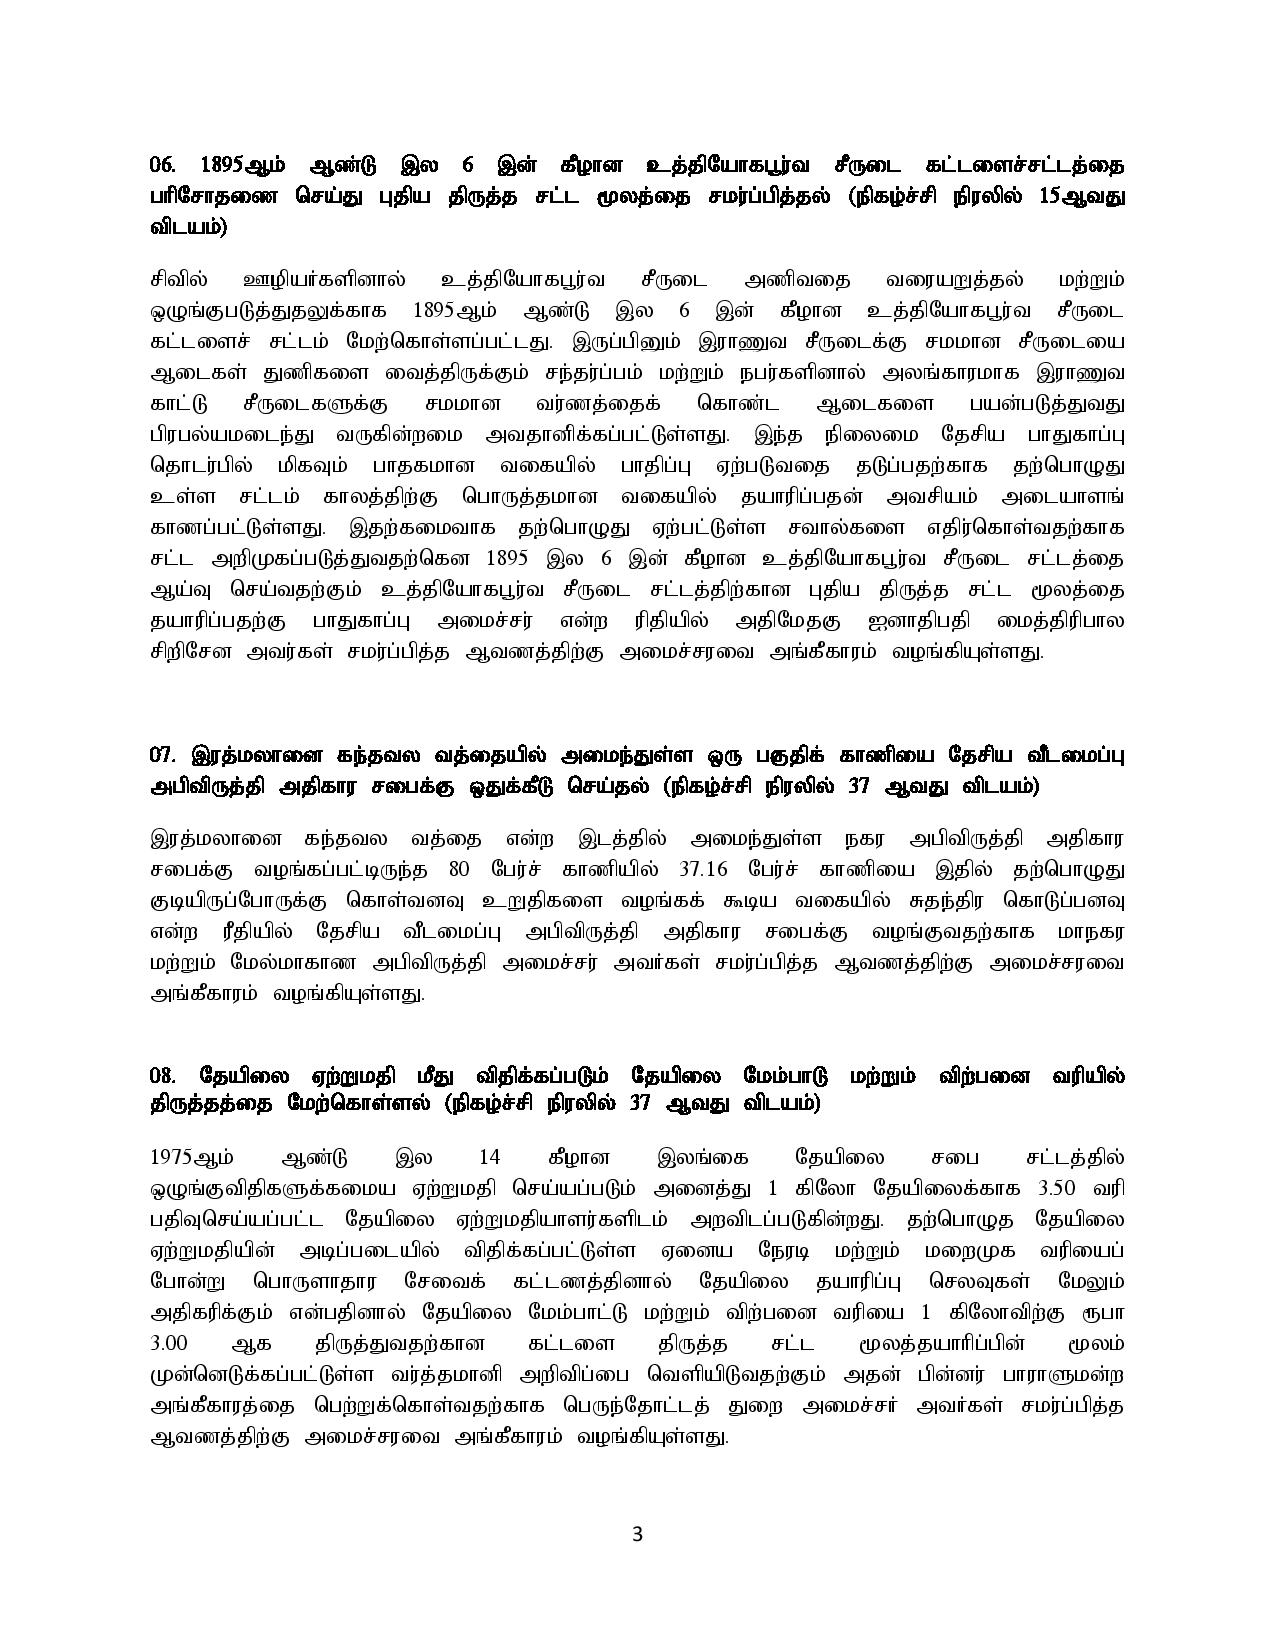 cabinet decision Tamil 19.07.2019 page 003